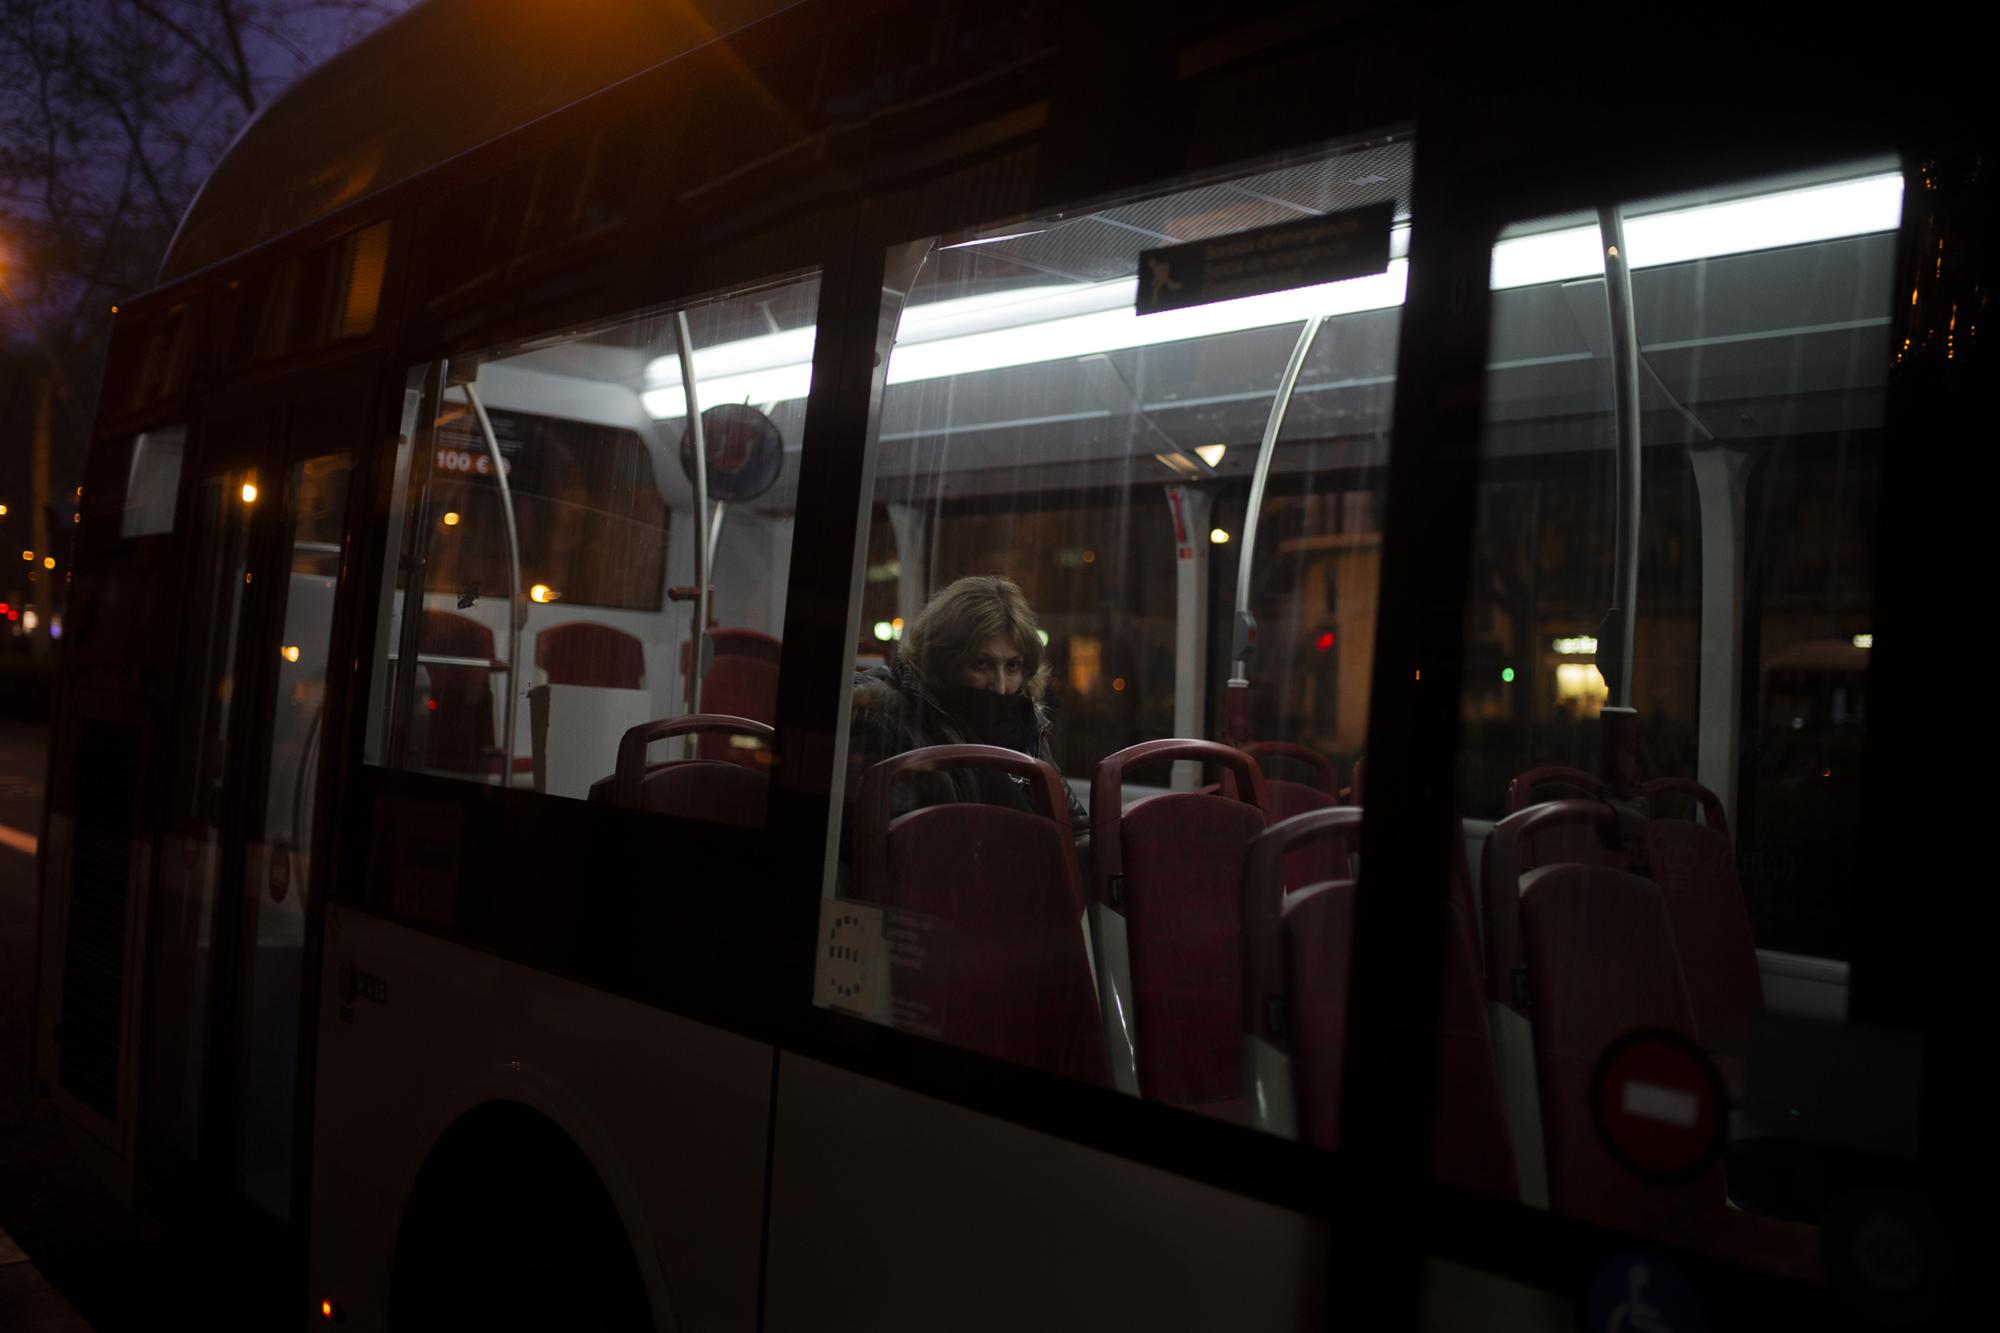 Covid 19 Daily News - A woman wearing a face mask travels by bus in Barcelona.